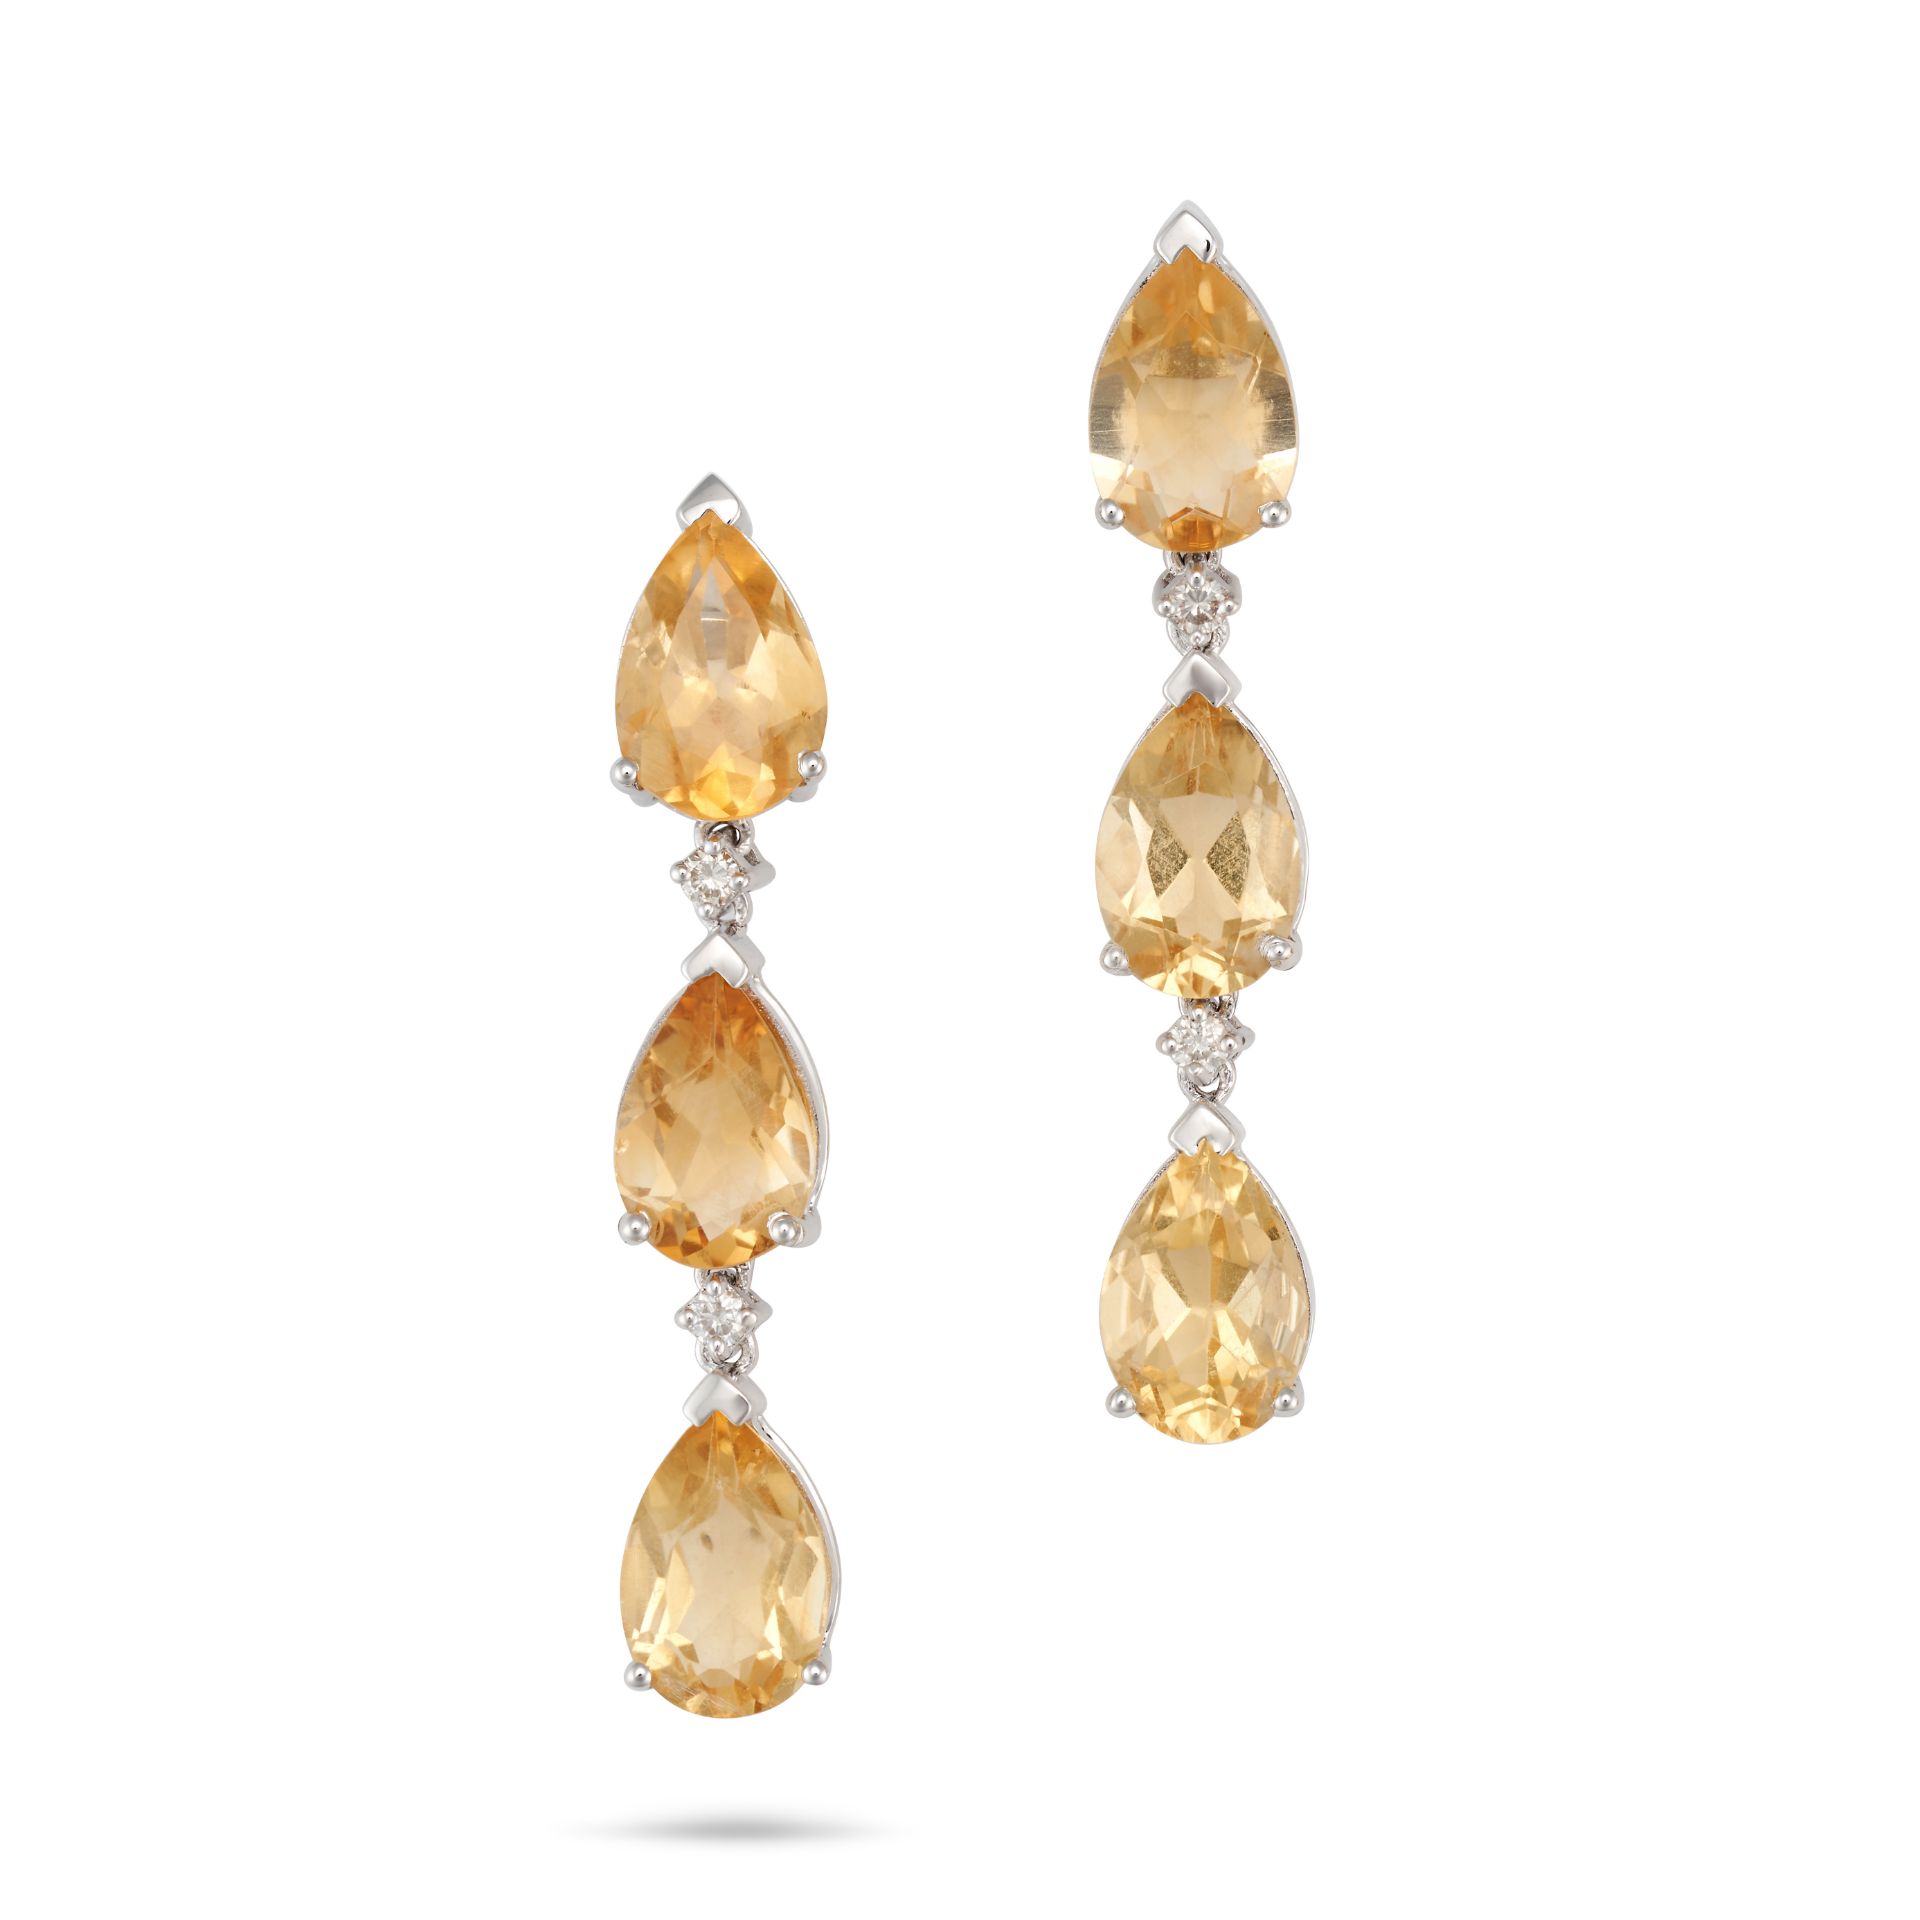 A PAIR OF YELLOW TOPAZ AND DIAMOND EARRINGS each set with a row of pear cut yellow topaz, accente...